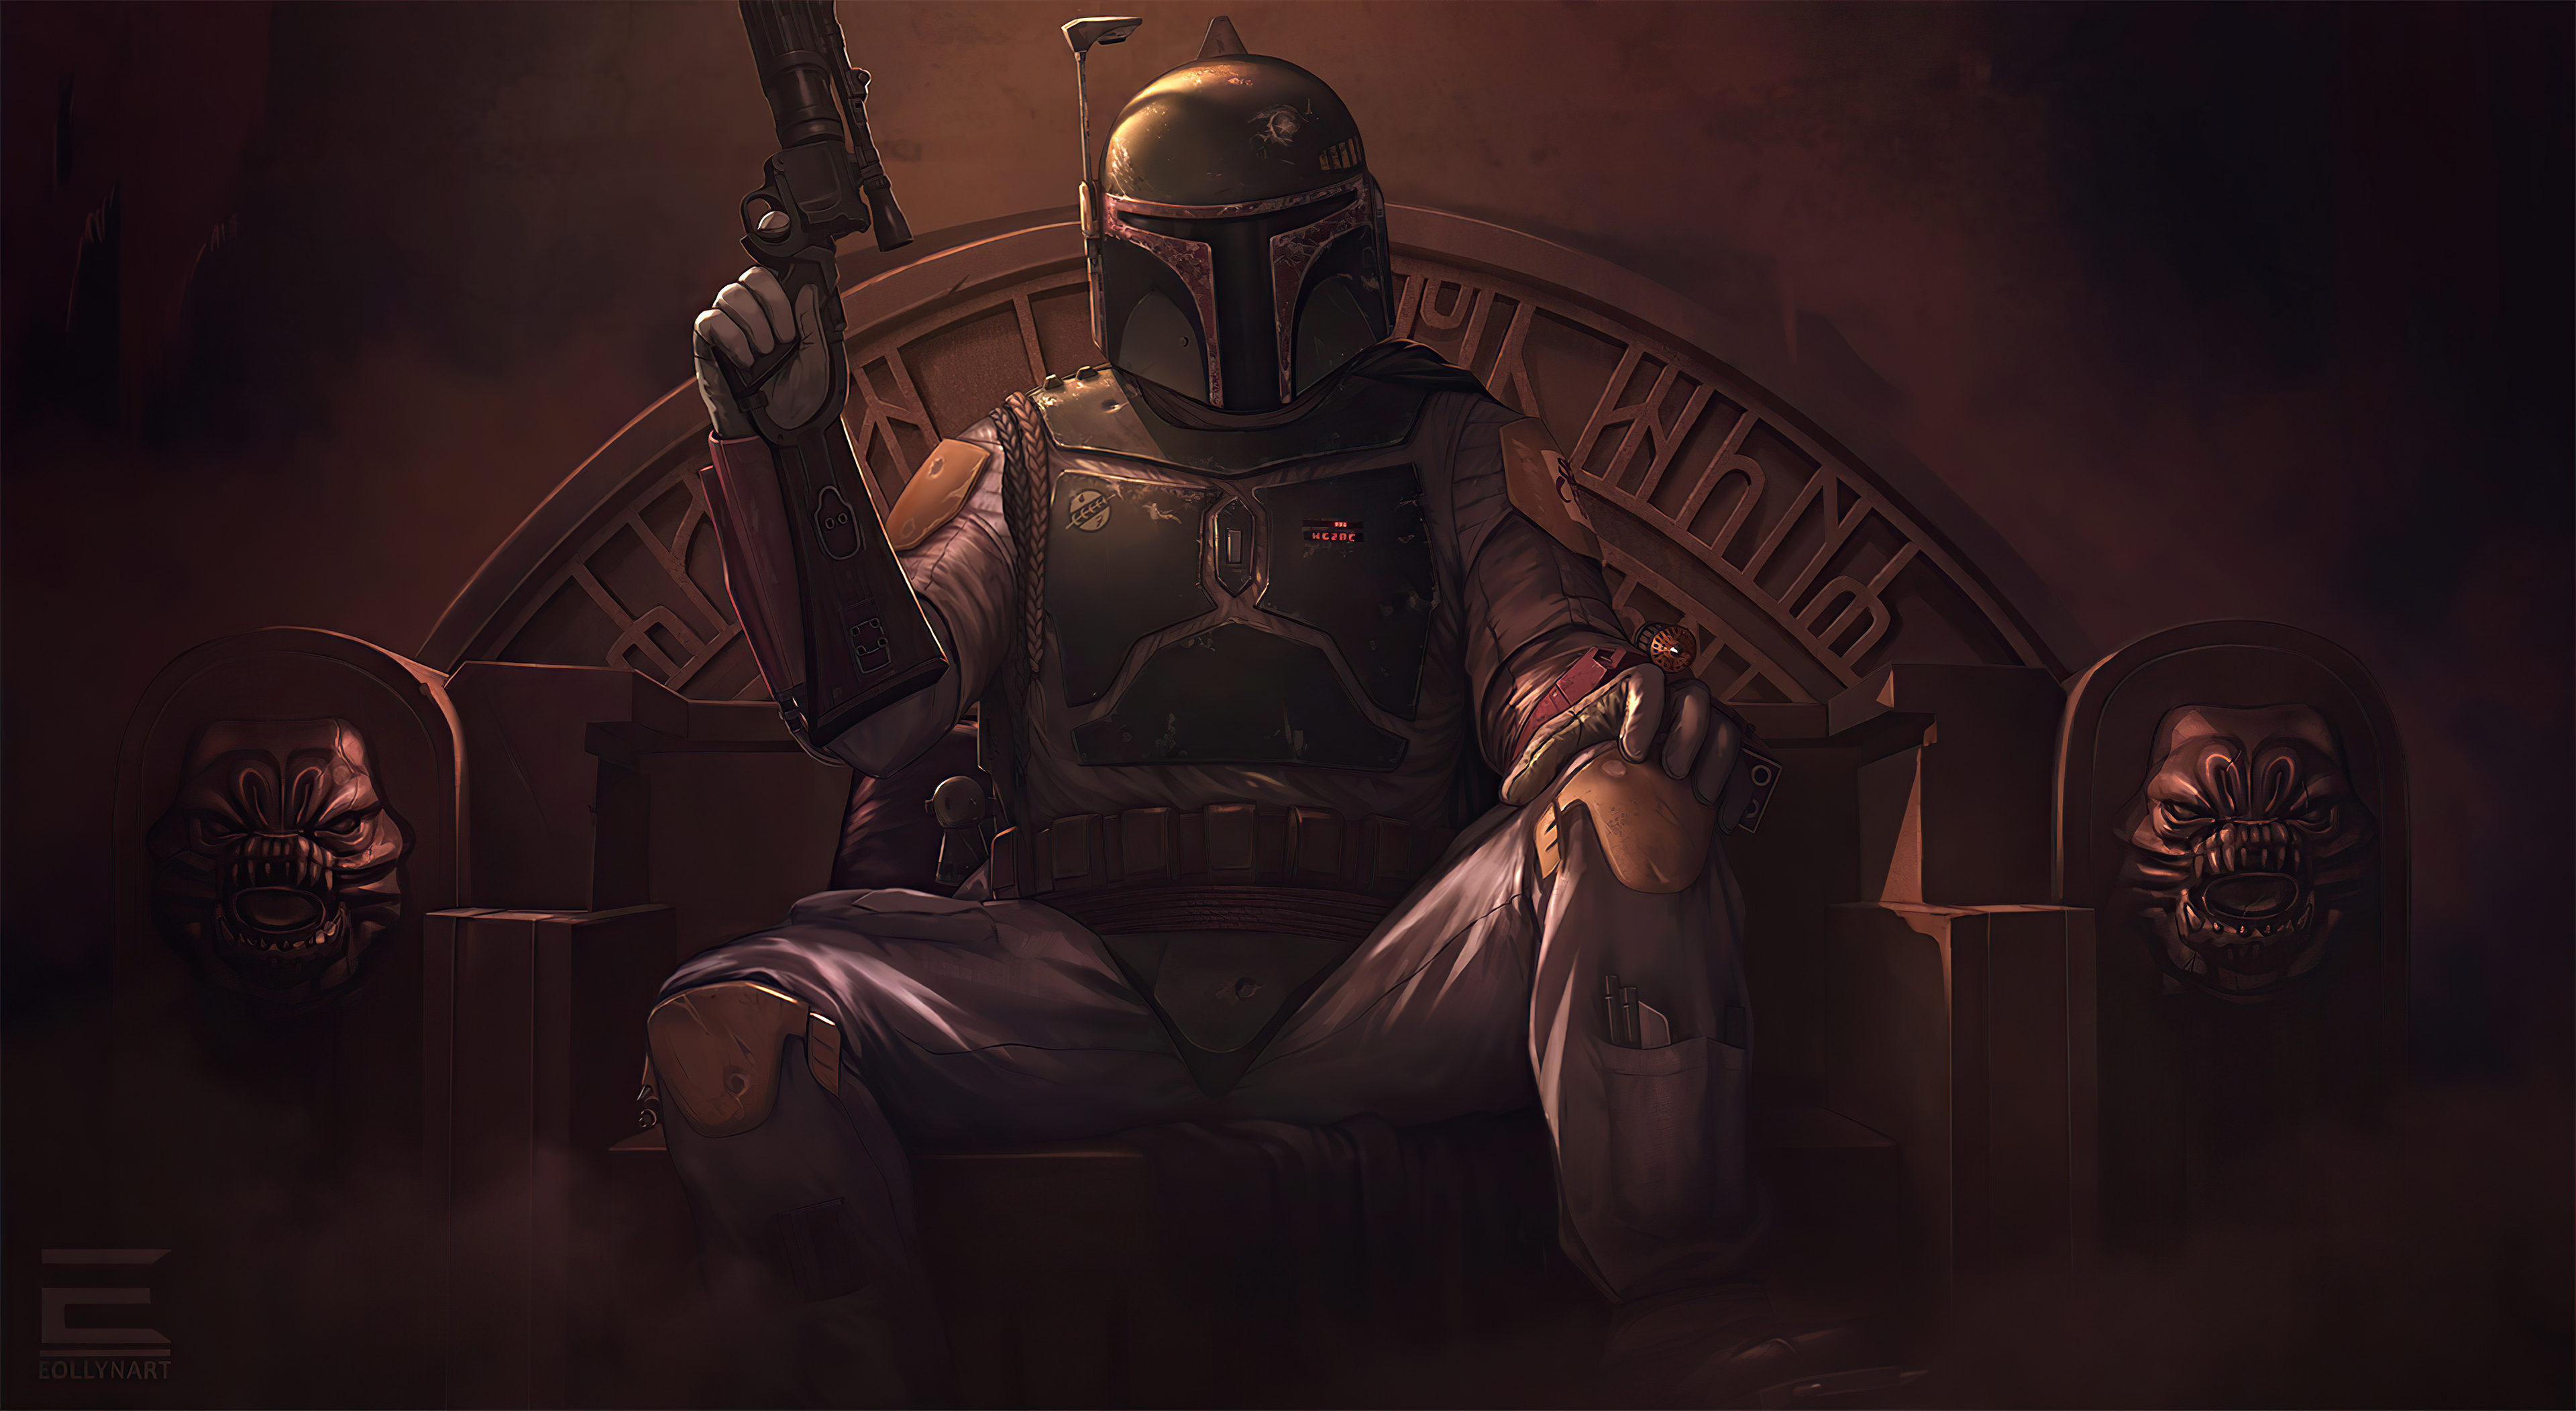 Boba Fett Wallpaper for mobile phone tablet desktop computer and other  devices HD and 4K wallpapers  Boba fett wallpaper Star wars boba fett Boba  fett